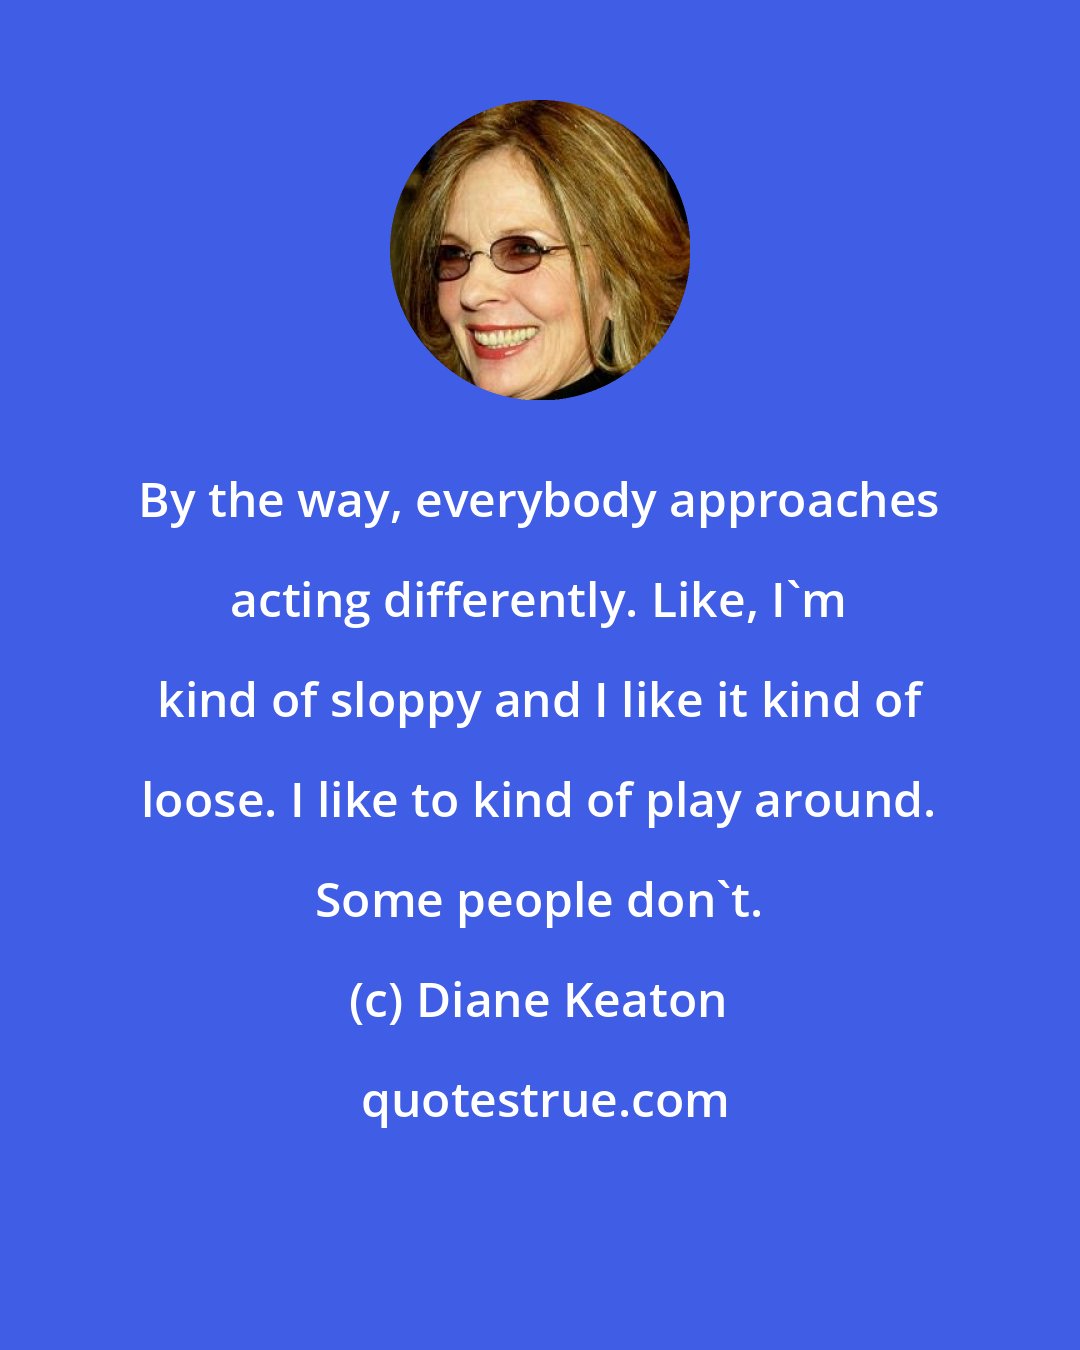 Diane Keaton: By the way, everybody approaches acting differently. Like, I'm kind of sloppy and I like it kind of loose. I like to kind of play around. Some people don't.